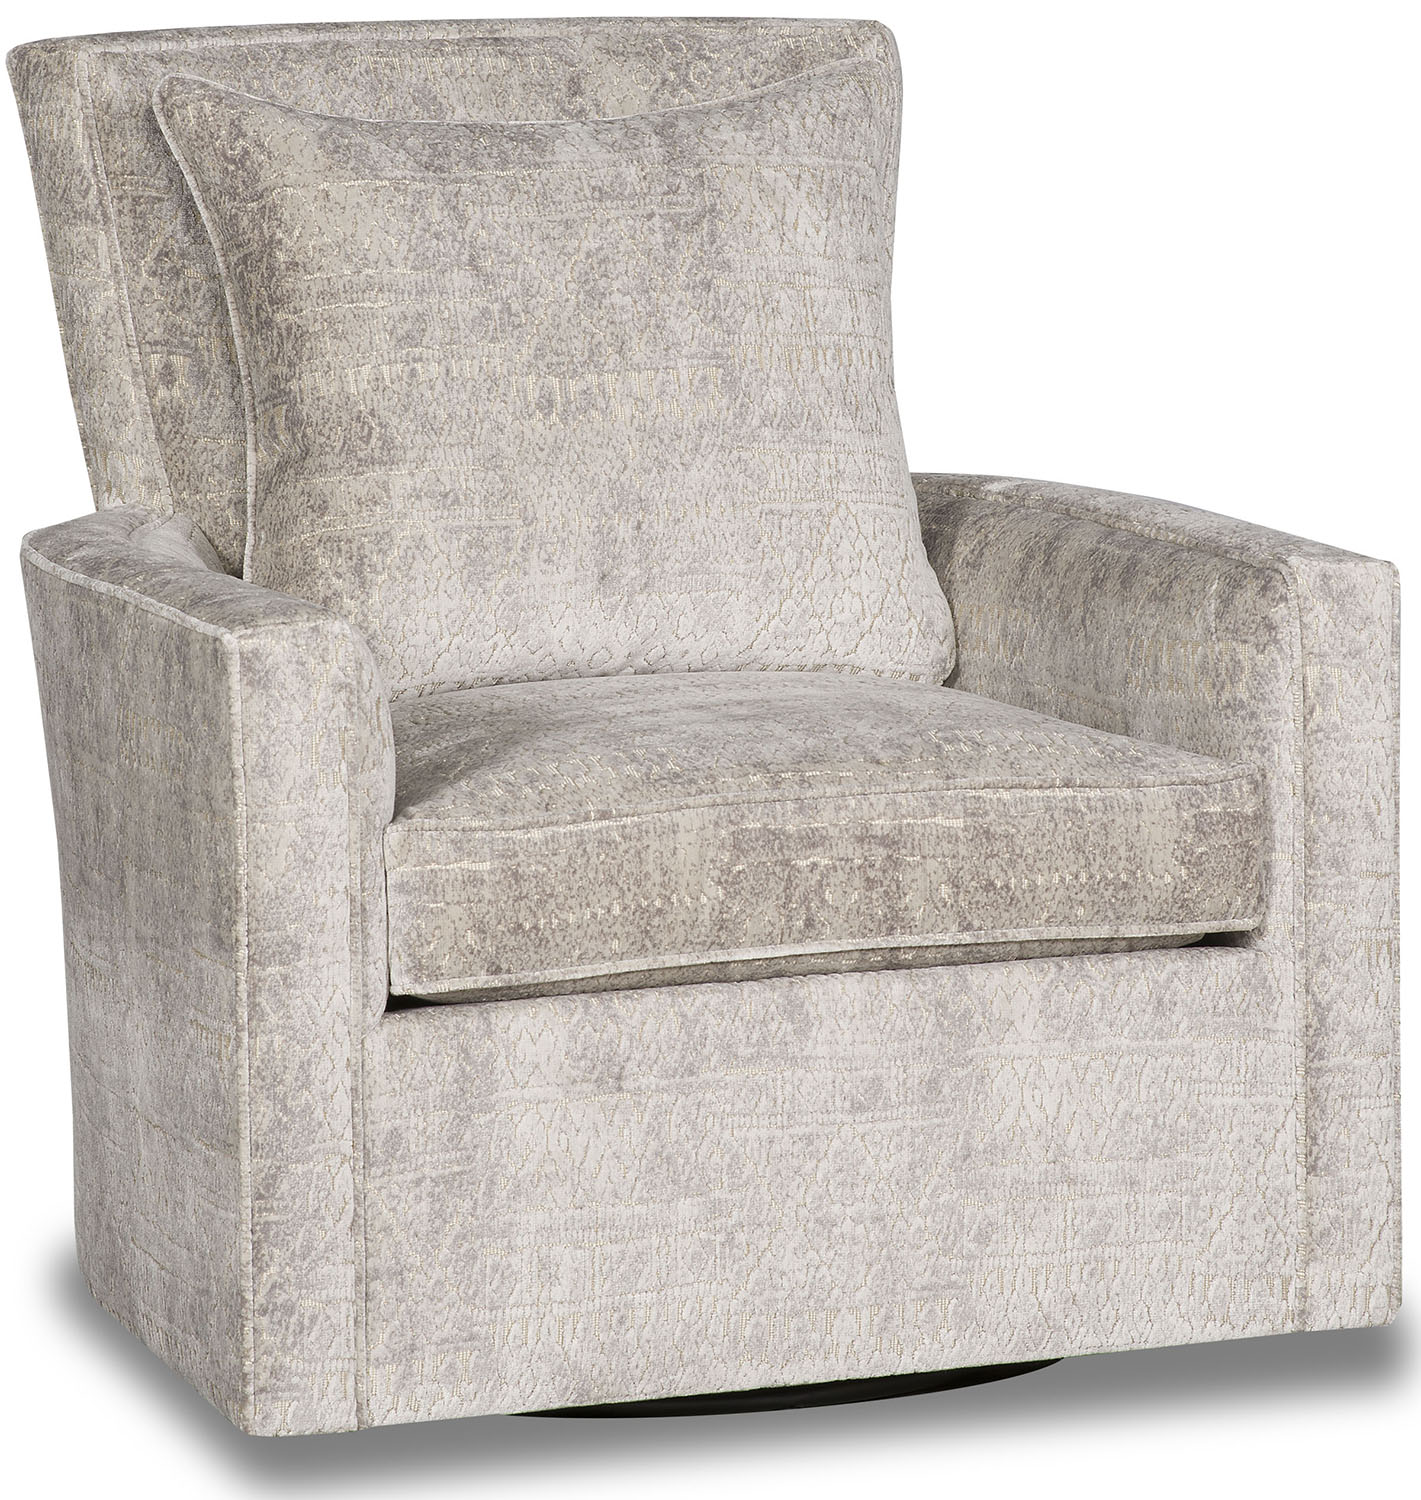 MOTION SEATING - Recliners, Swivels, Rockers Stunning Stories in Stone Swivel Accent Chair